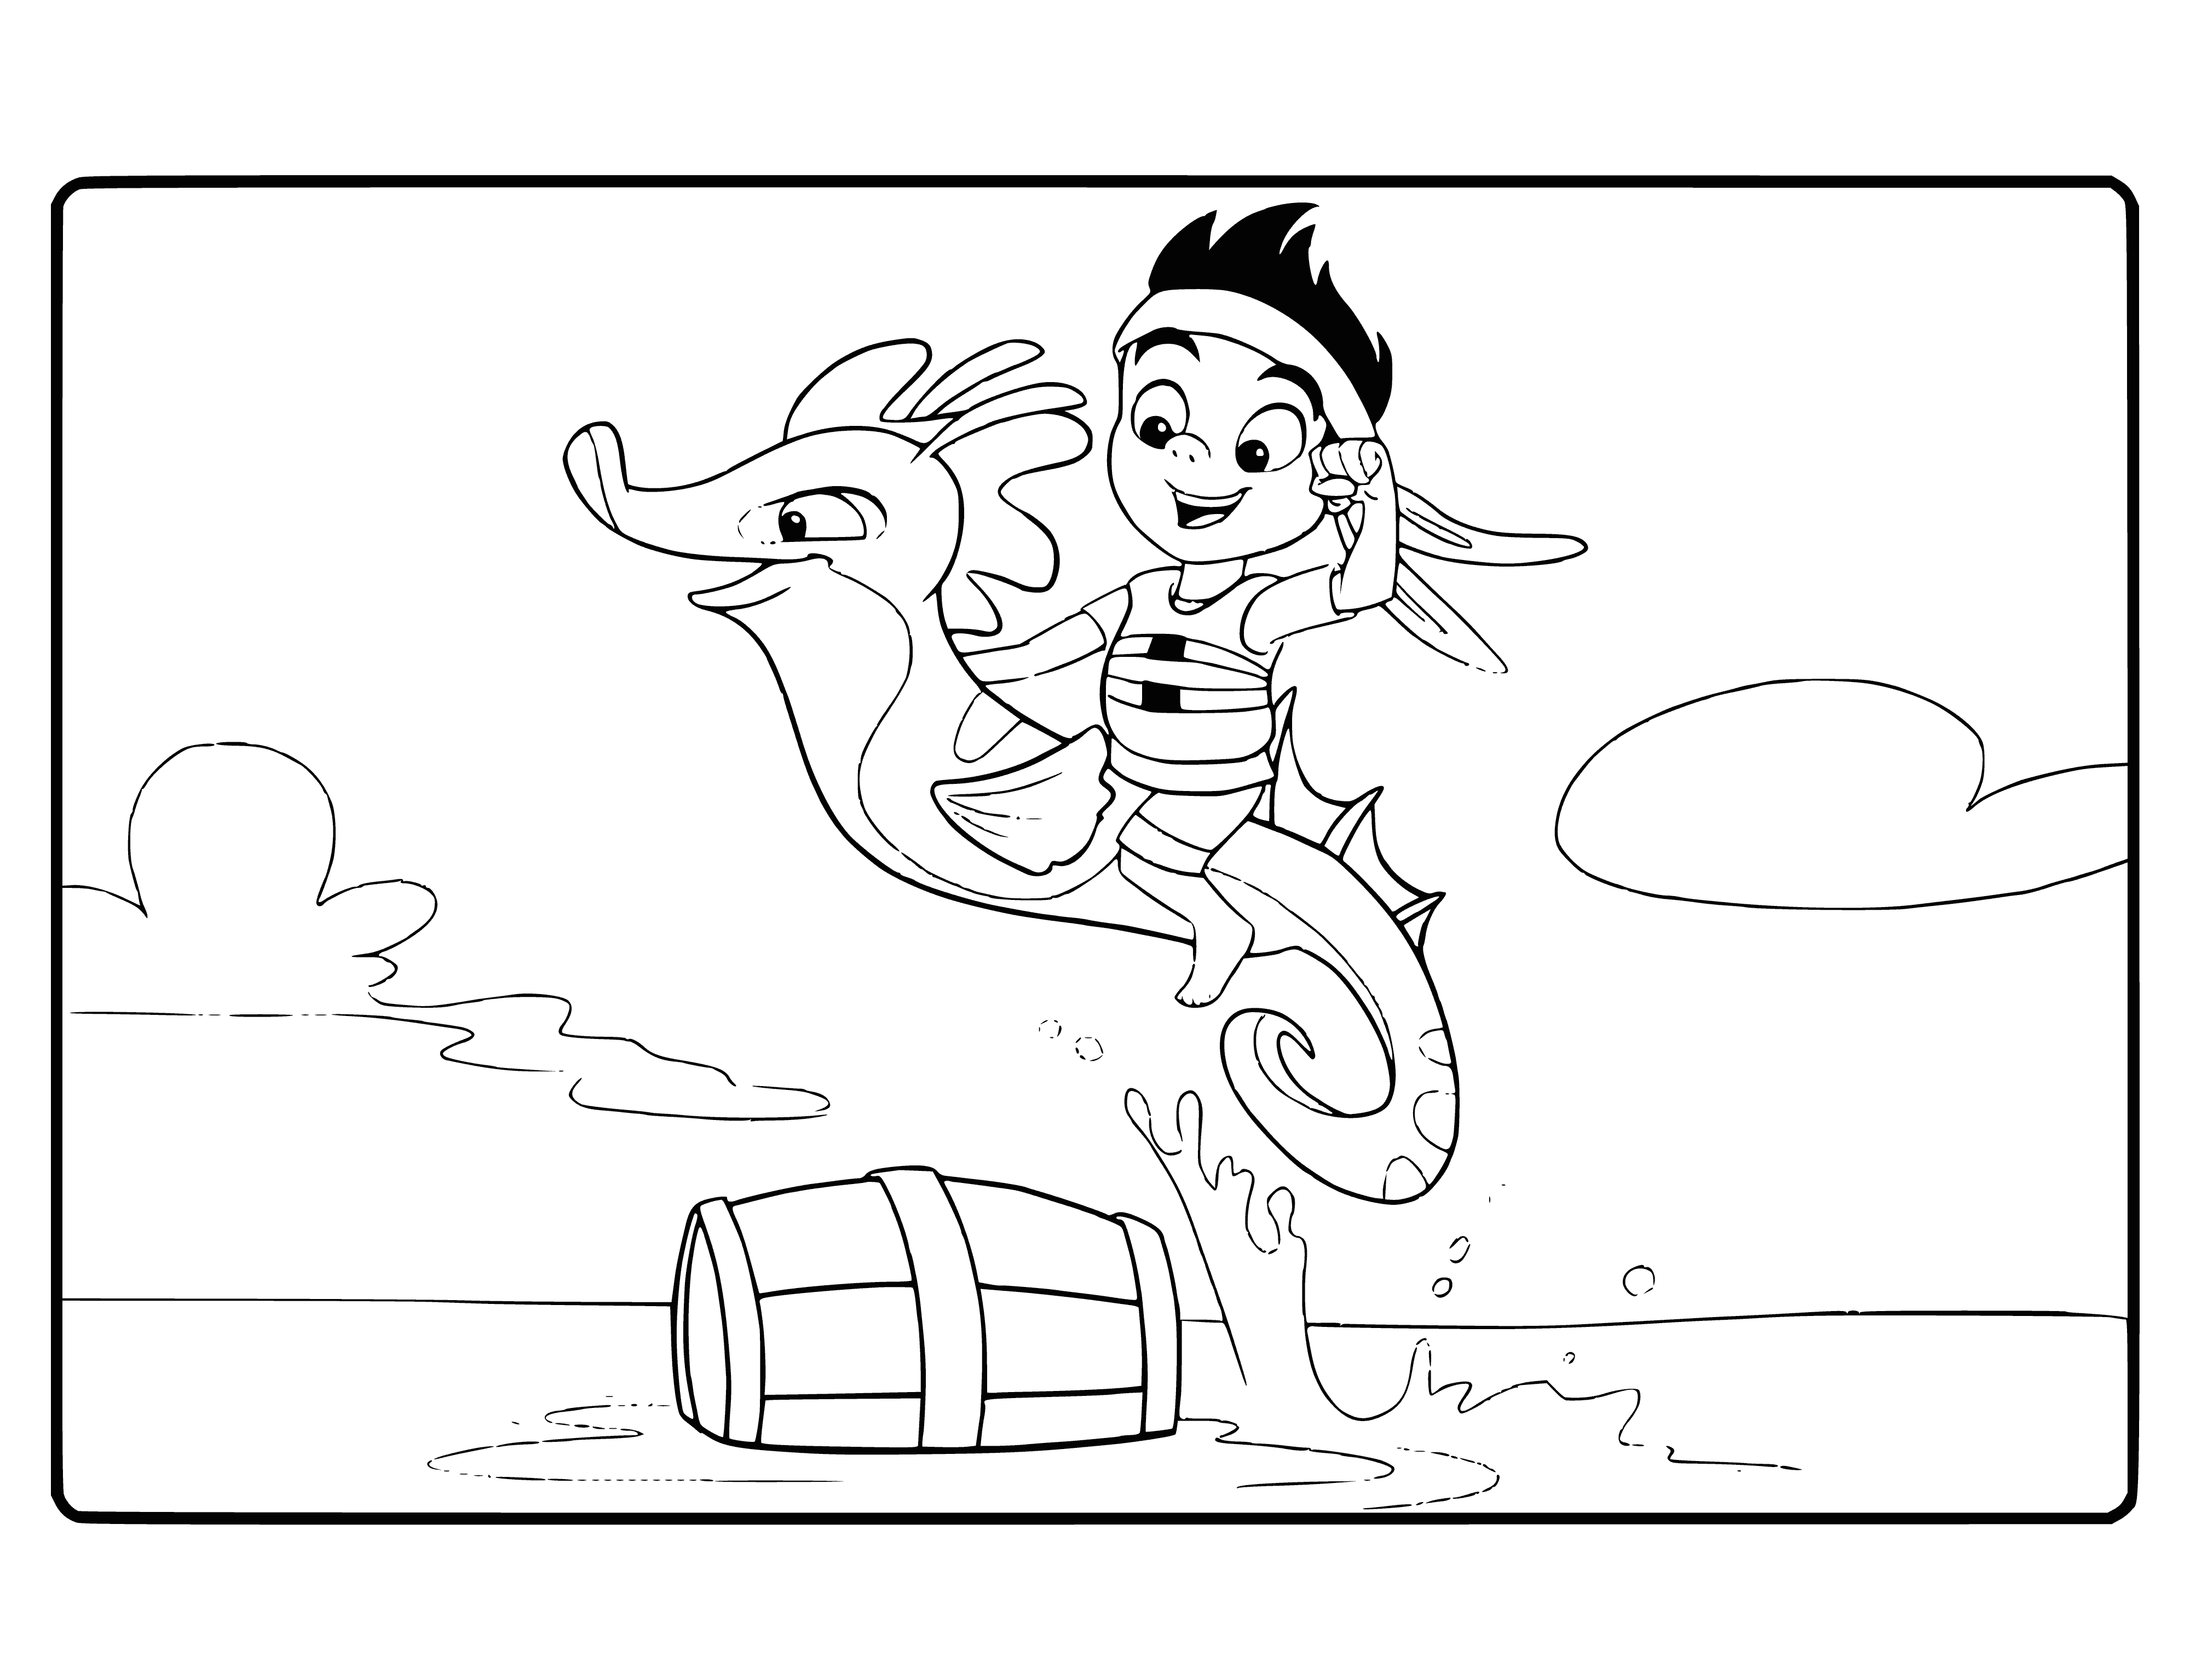 Jake on a seahorse coloring page